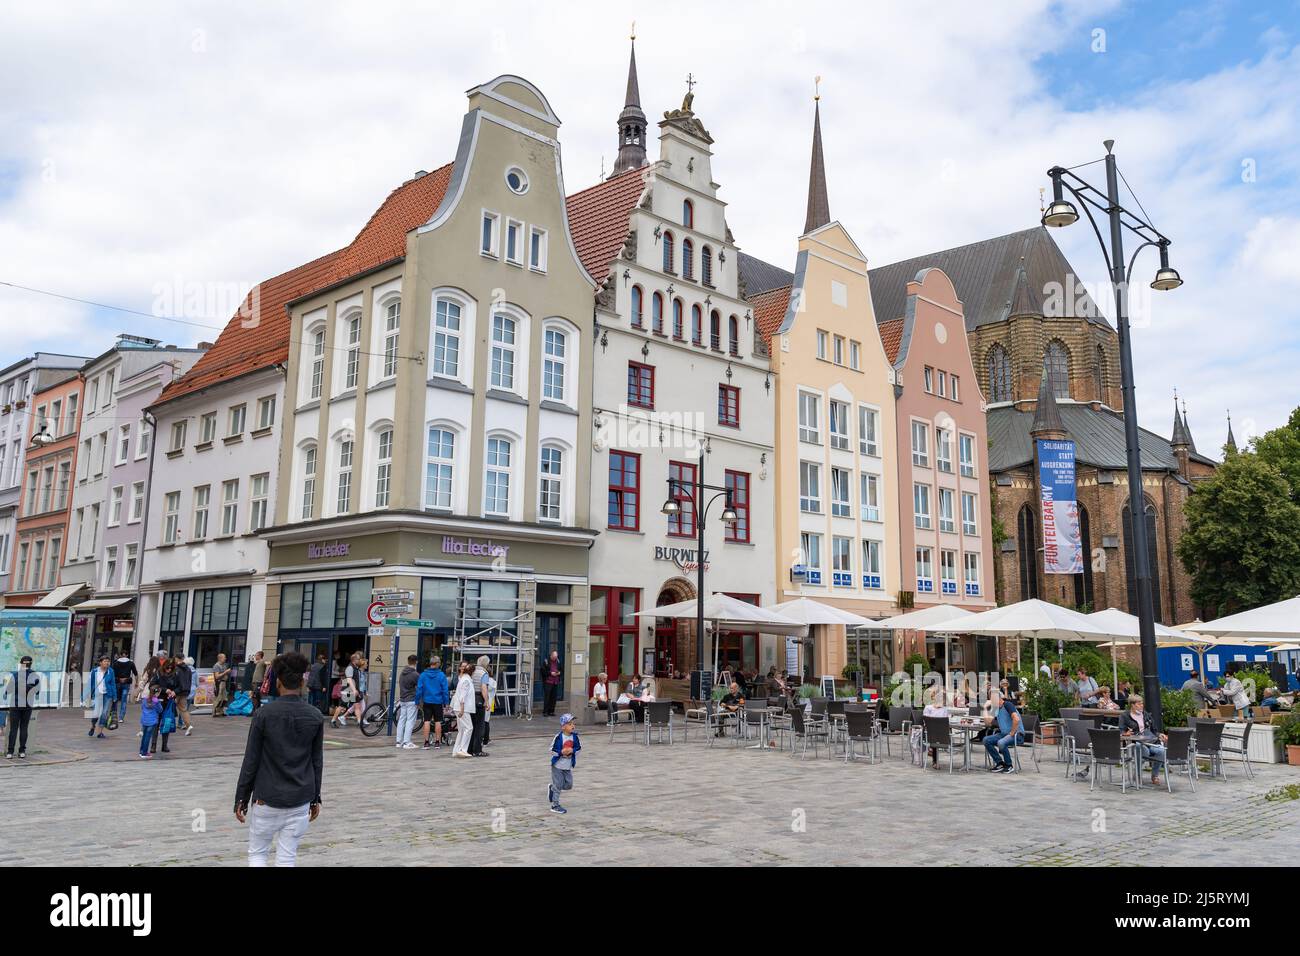 Historical building facades on the new market in the city. People in the town are having a great time. Beautiful architecture for tourism. Stock Photo